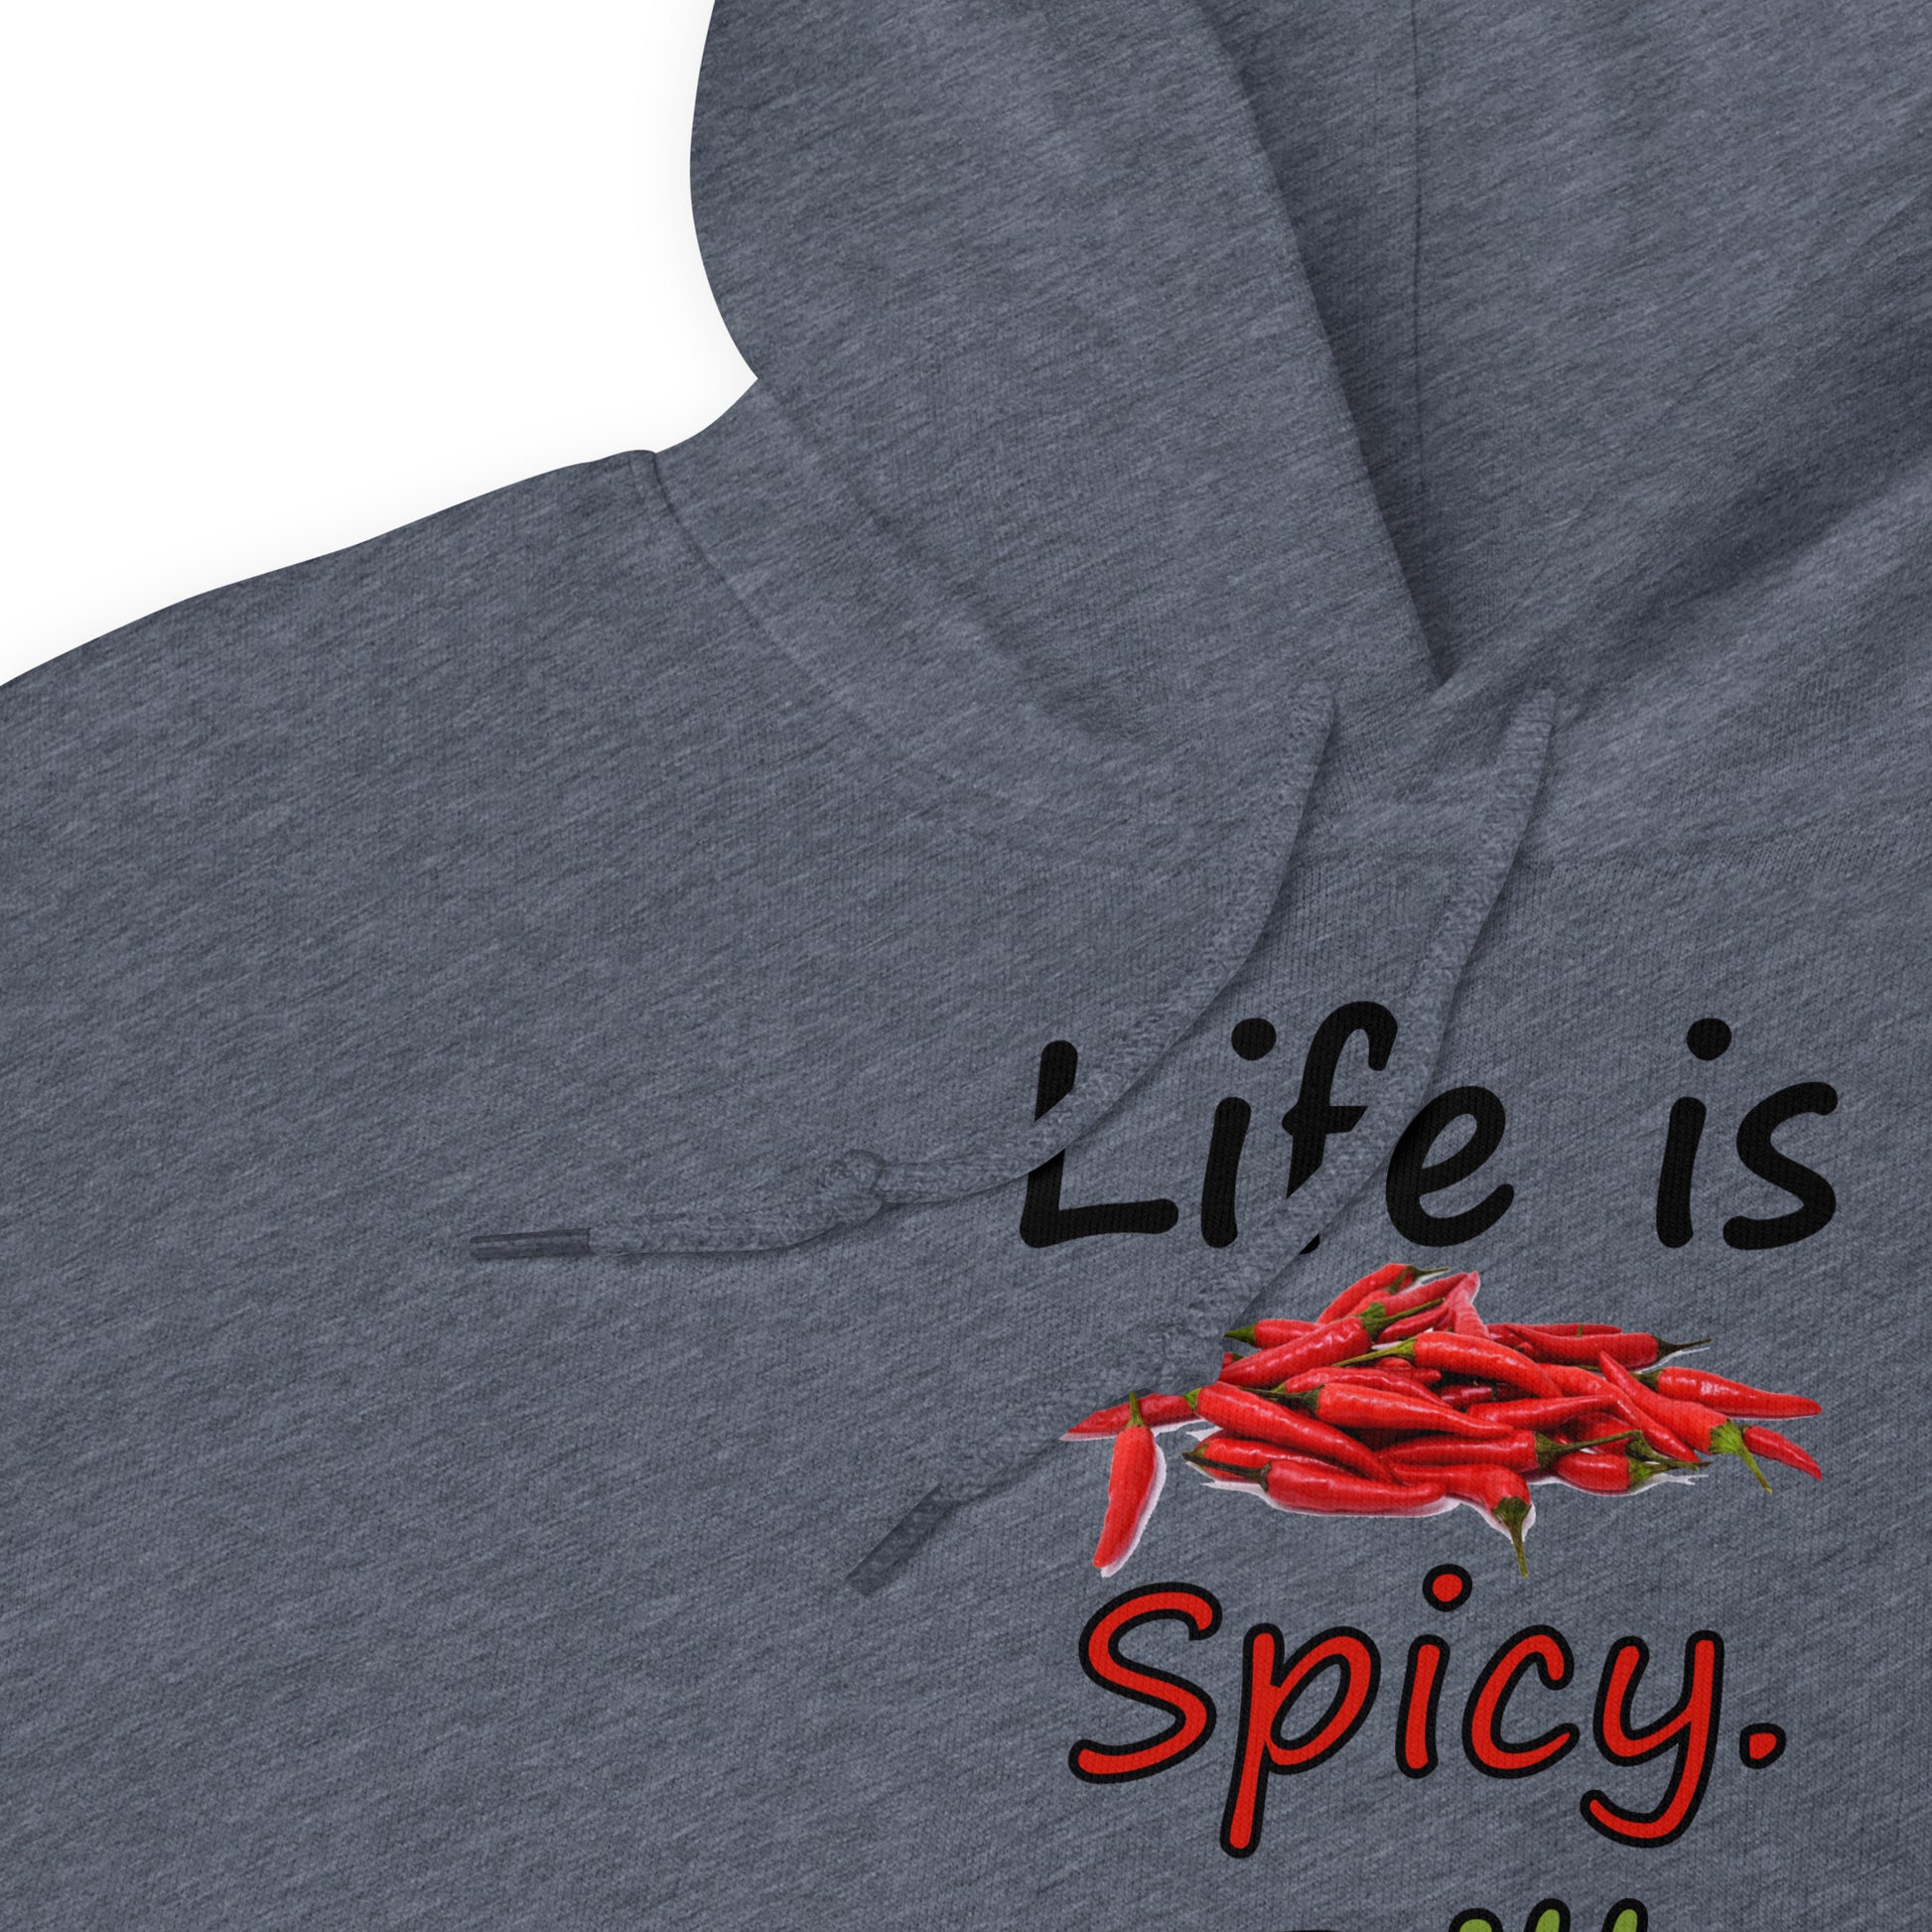 Heather dark grey colored unisex heavy blend hoodie.  Double lined hood, matching drawcord, front pouch pocket. Rib knit cuffs and waistband. Features text and image: Life is spicy. Dill with it.  Detail view of hood and drawcord.